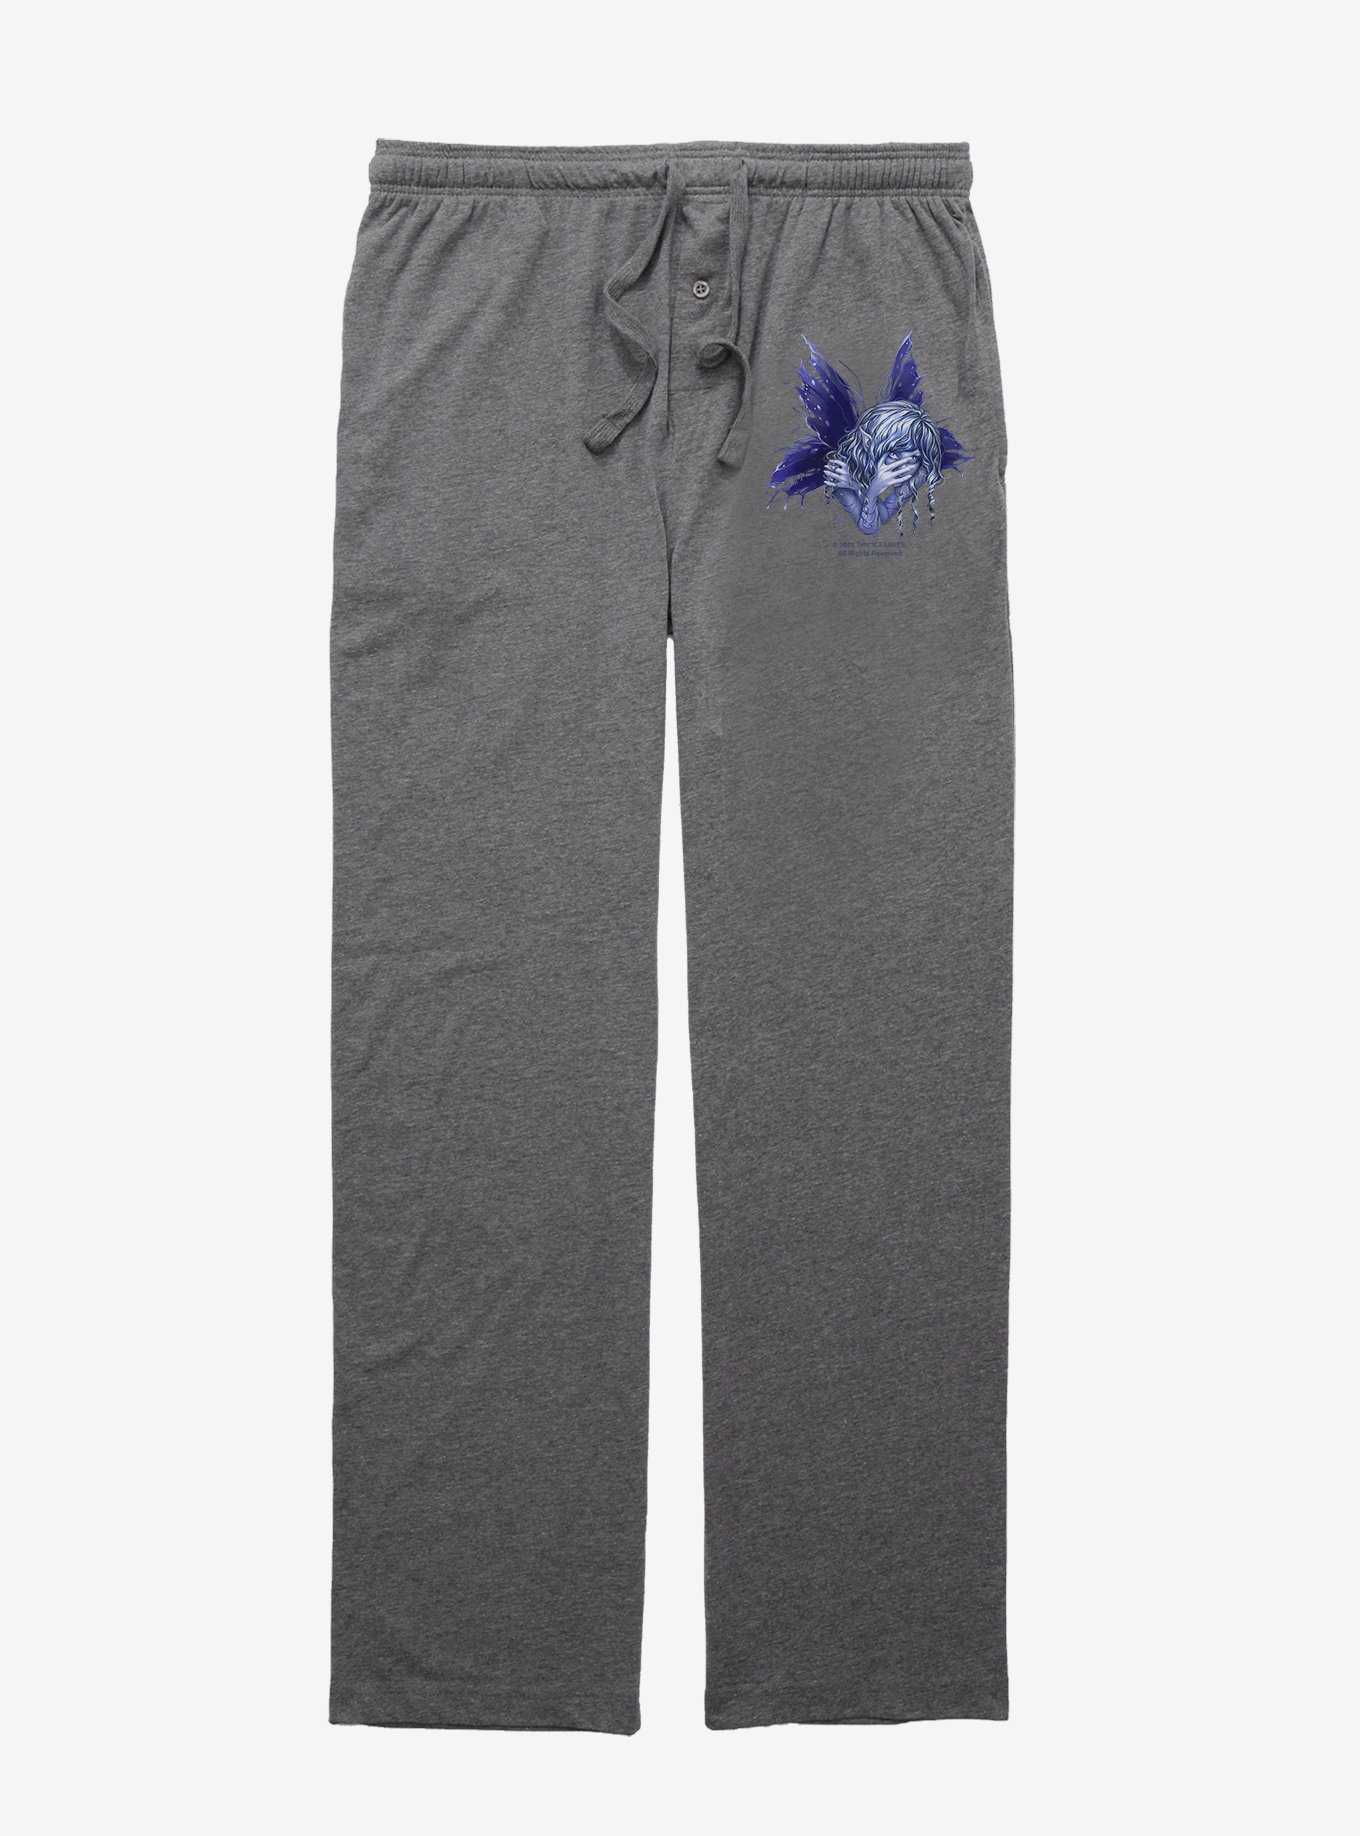 Trick Fairies Faced Covered Fairy Pajama Pants, GRAPHITE HEATHER, hi-res